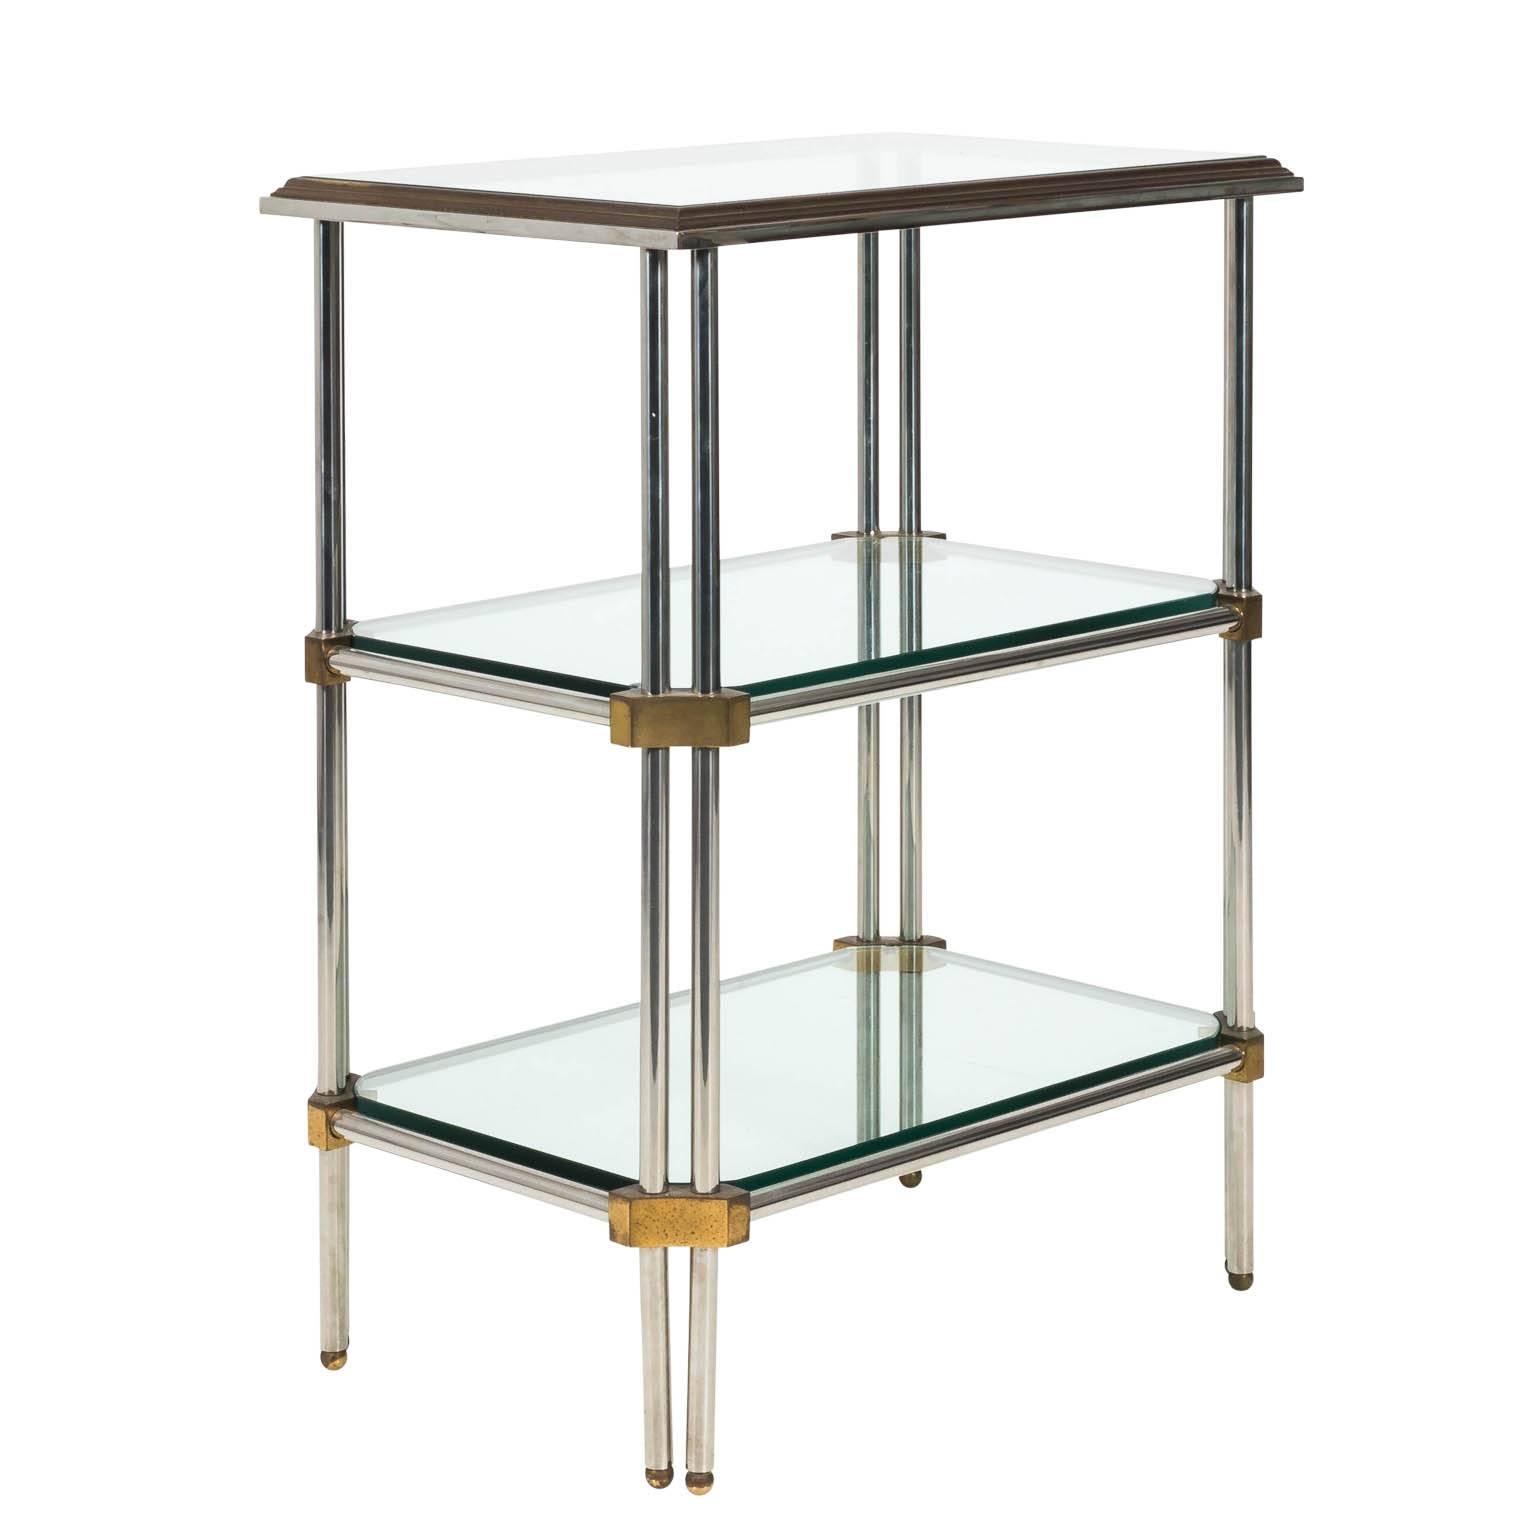 Hollywood Regency style three tier étagère with glass tops and brass accents in a polished finish with some minor scratchers and wear, circa late 20th century.
 